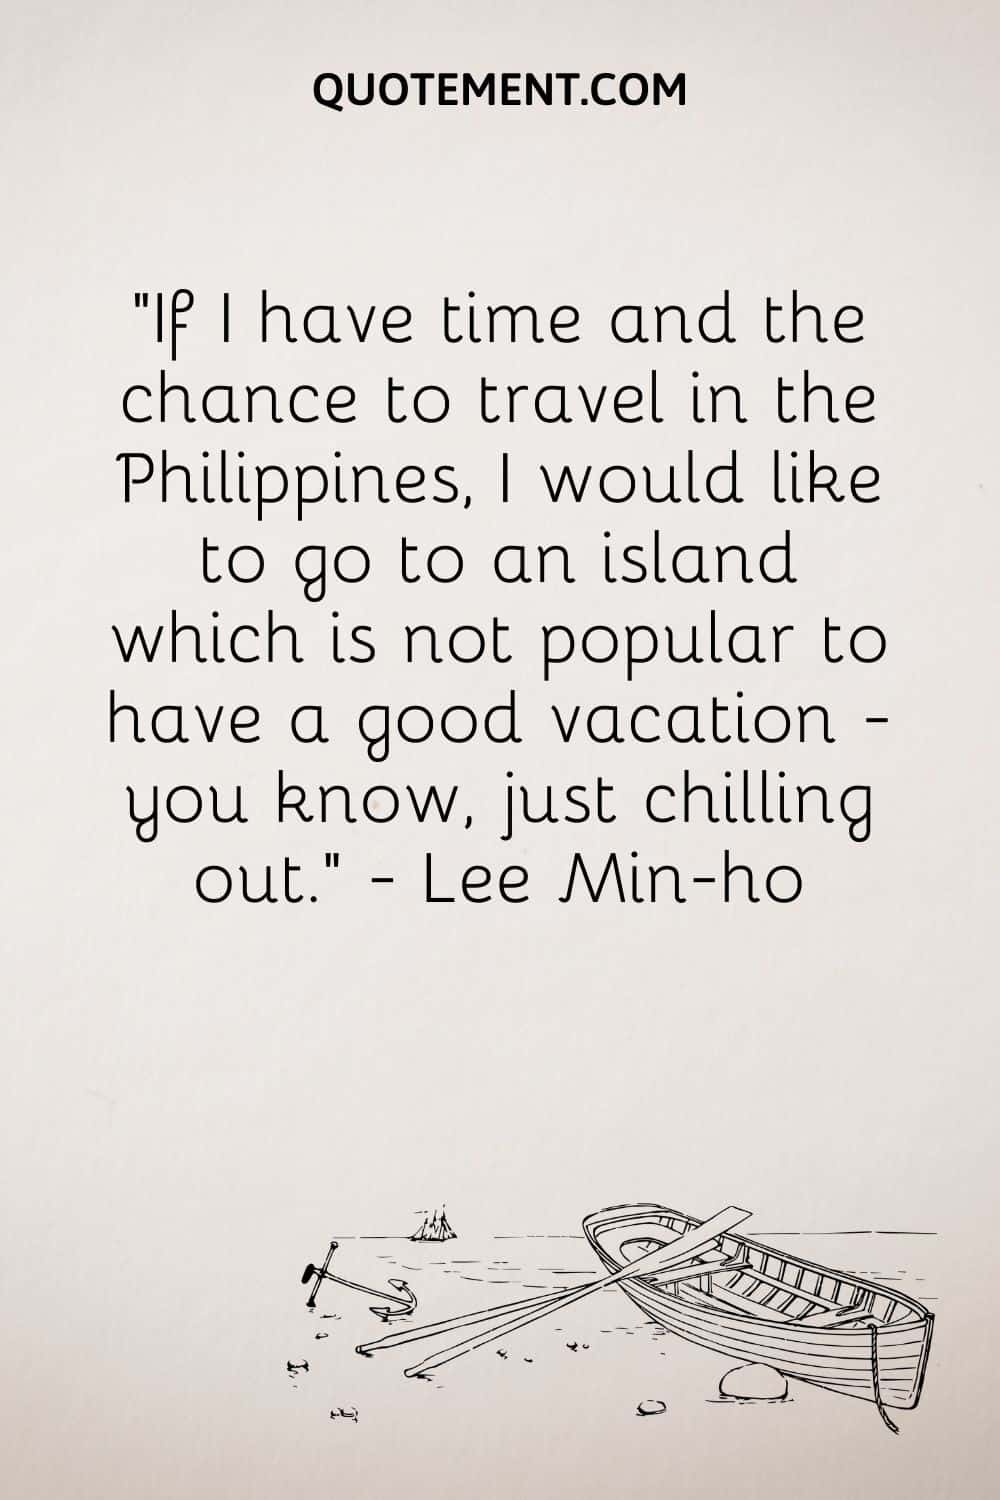 “If I have time and the chance to travel in the Philippines, I would like to go to an island which is not popular to have a good vacation - you know, just chilling out.” — Lee Min-ho